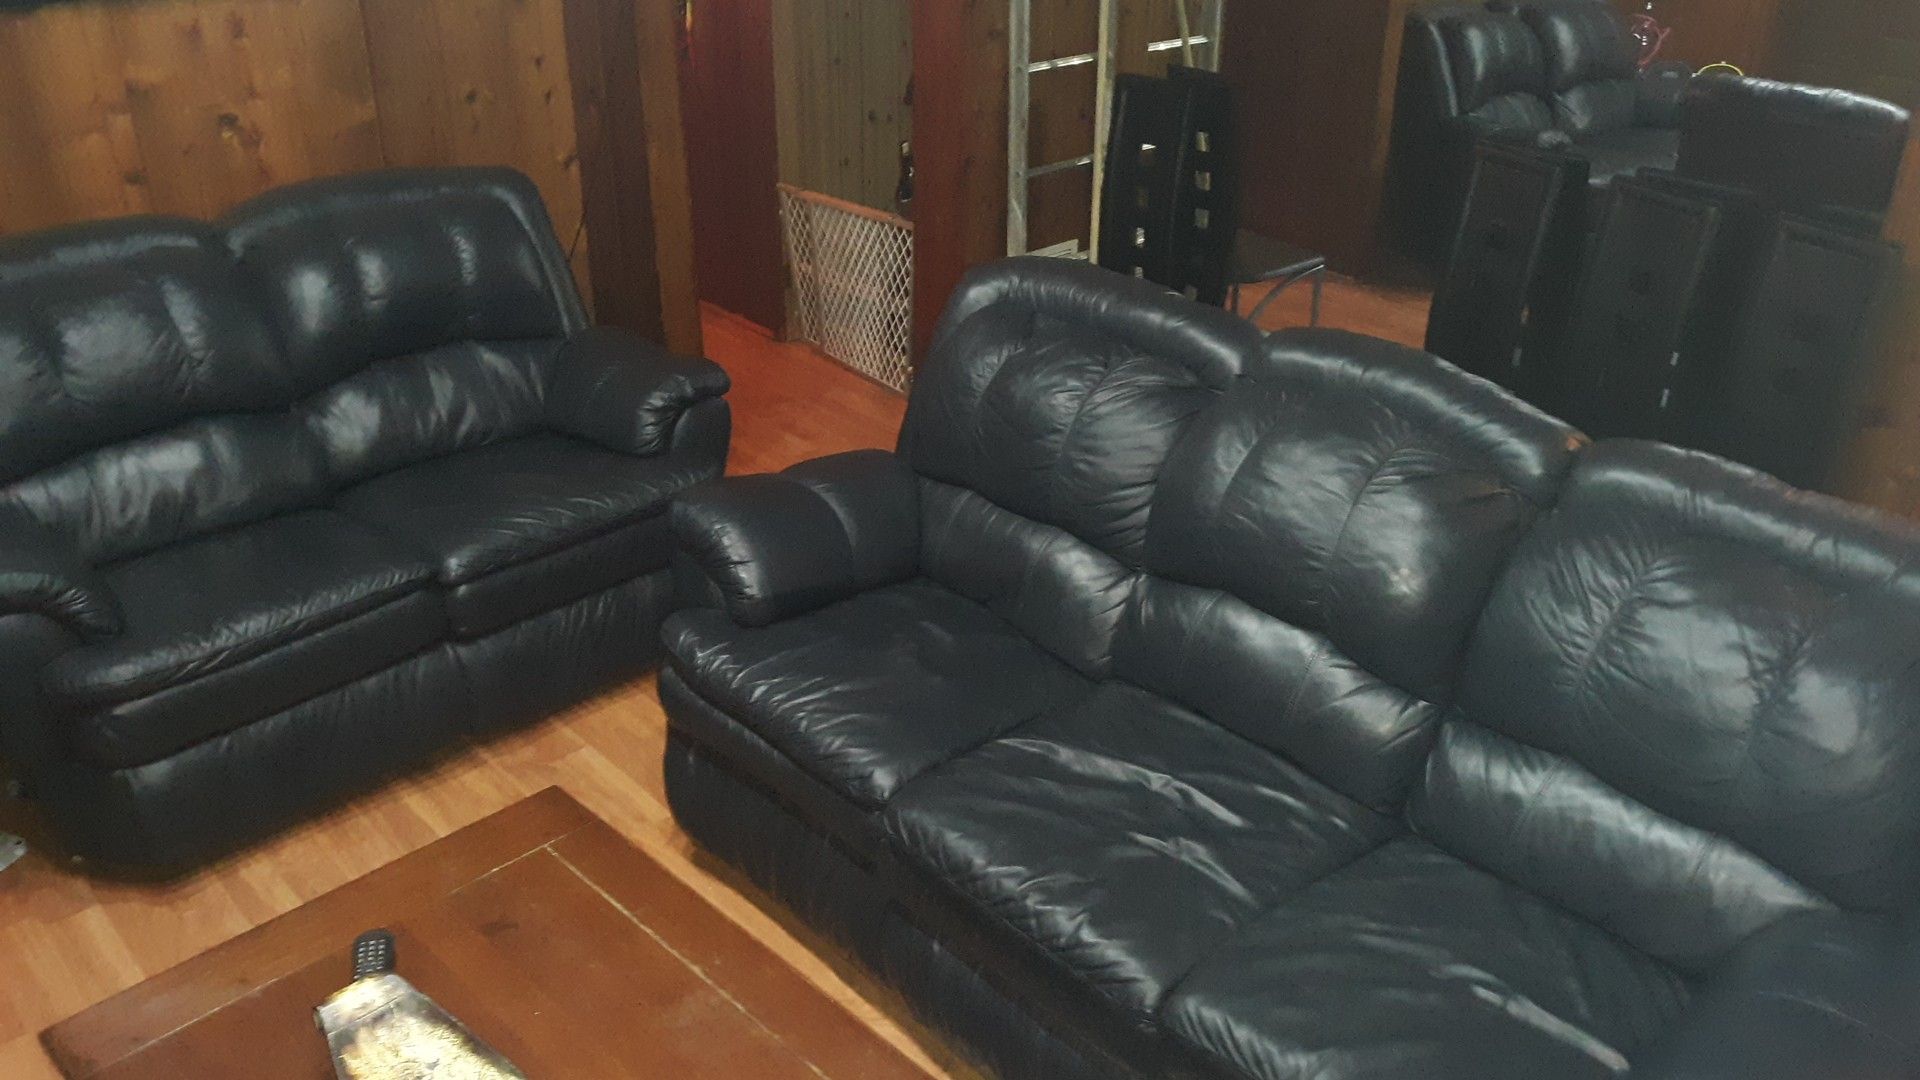 Leather couch and love seat